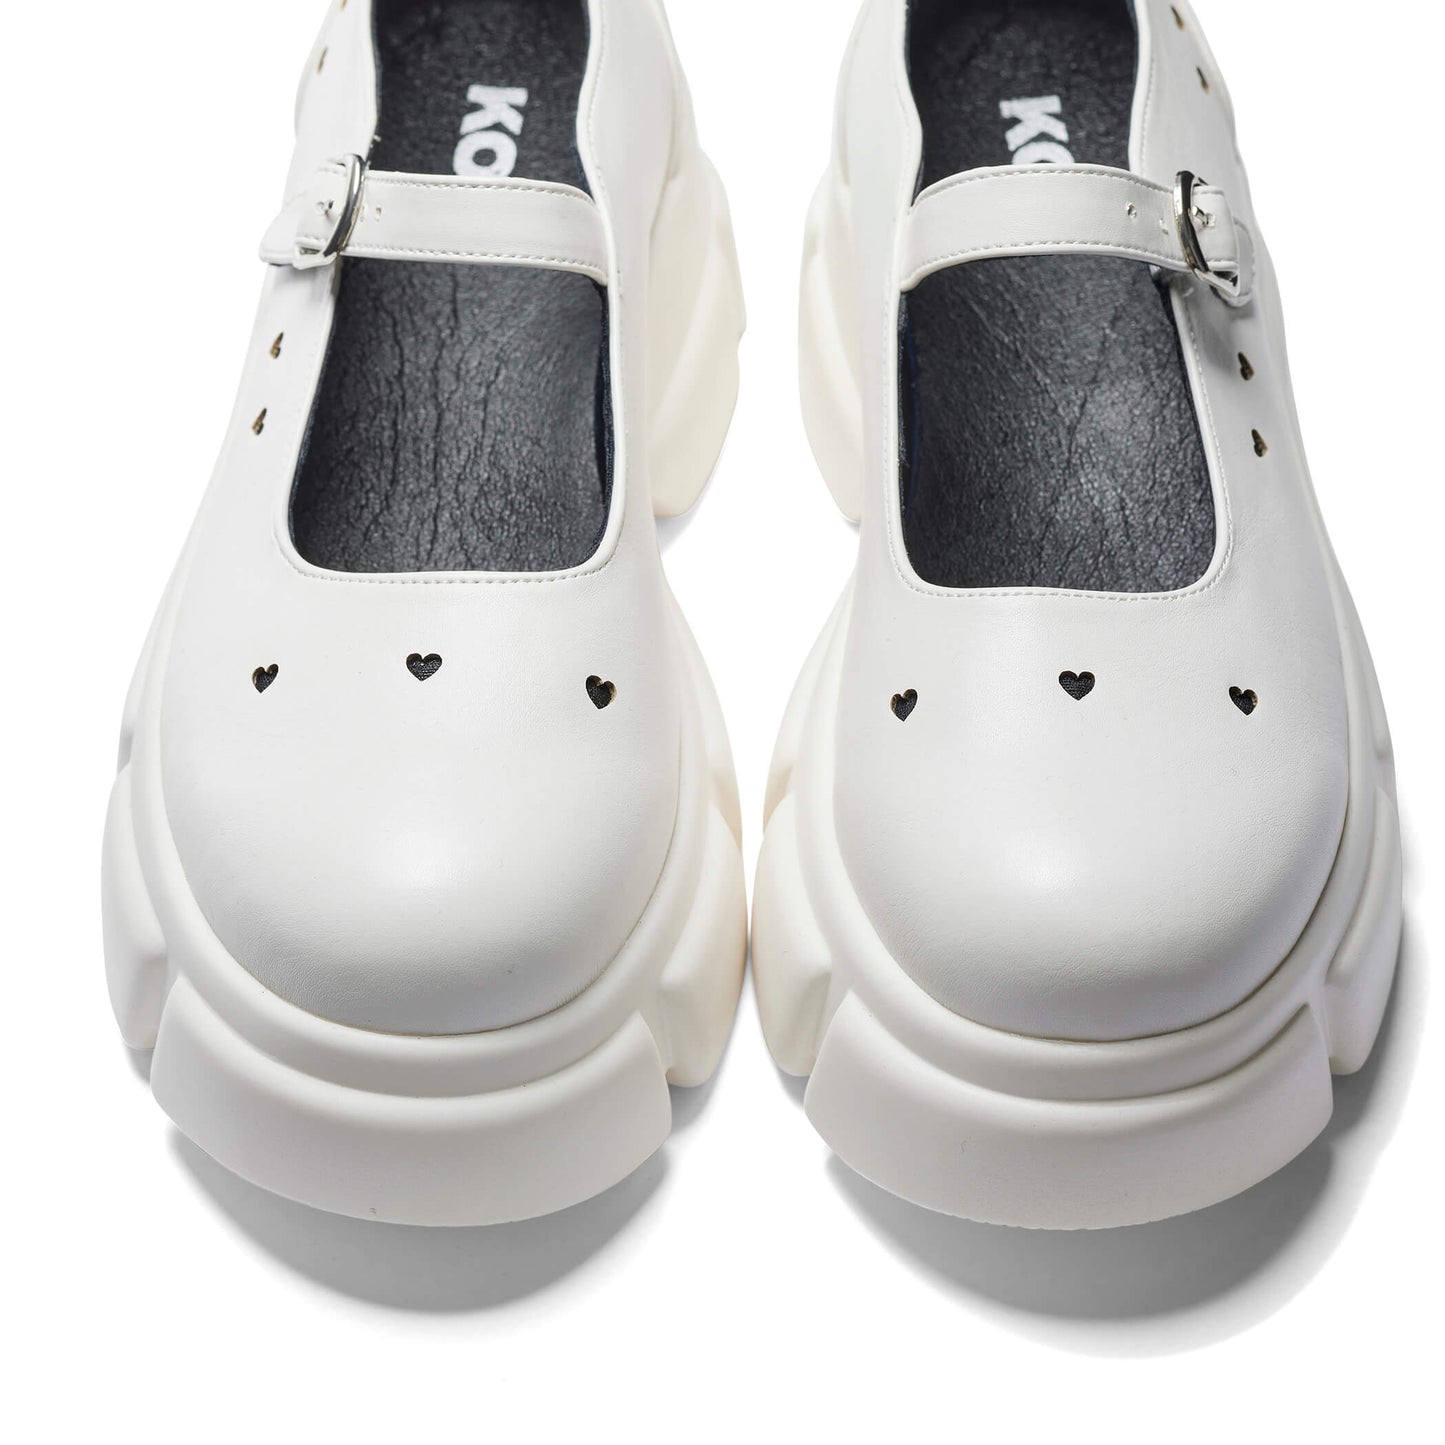 Harmony Heart Mary Jane Shoes - White - Shoes - KOI Footwear - White - Top View